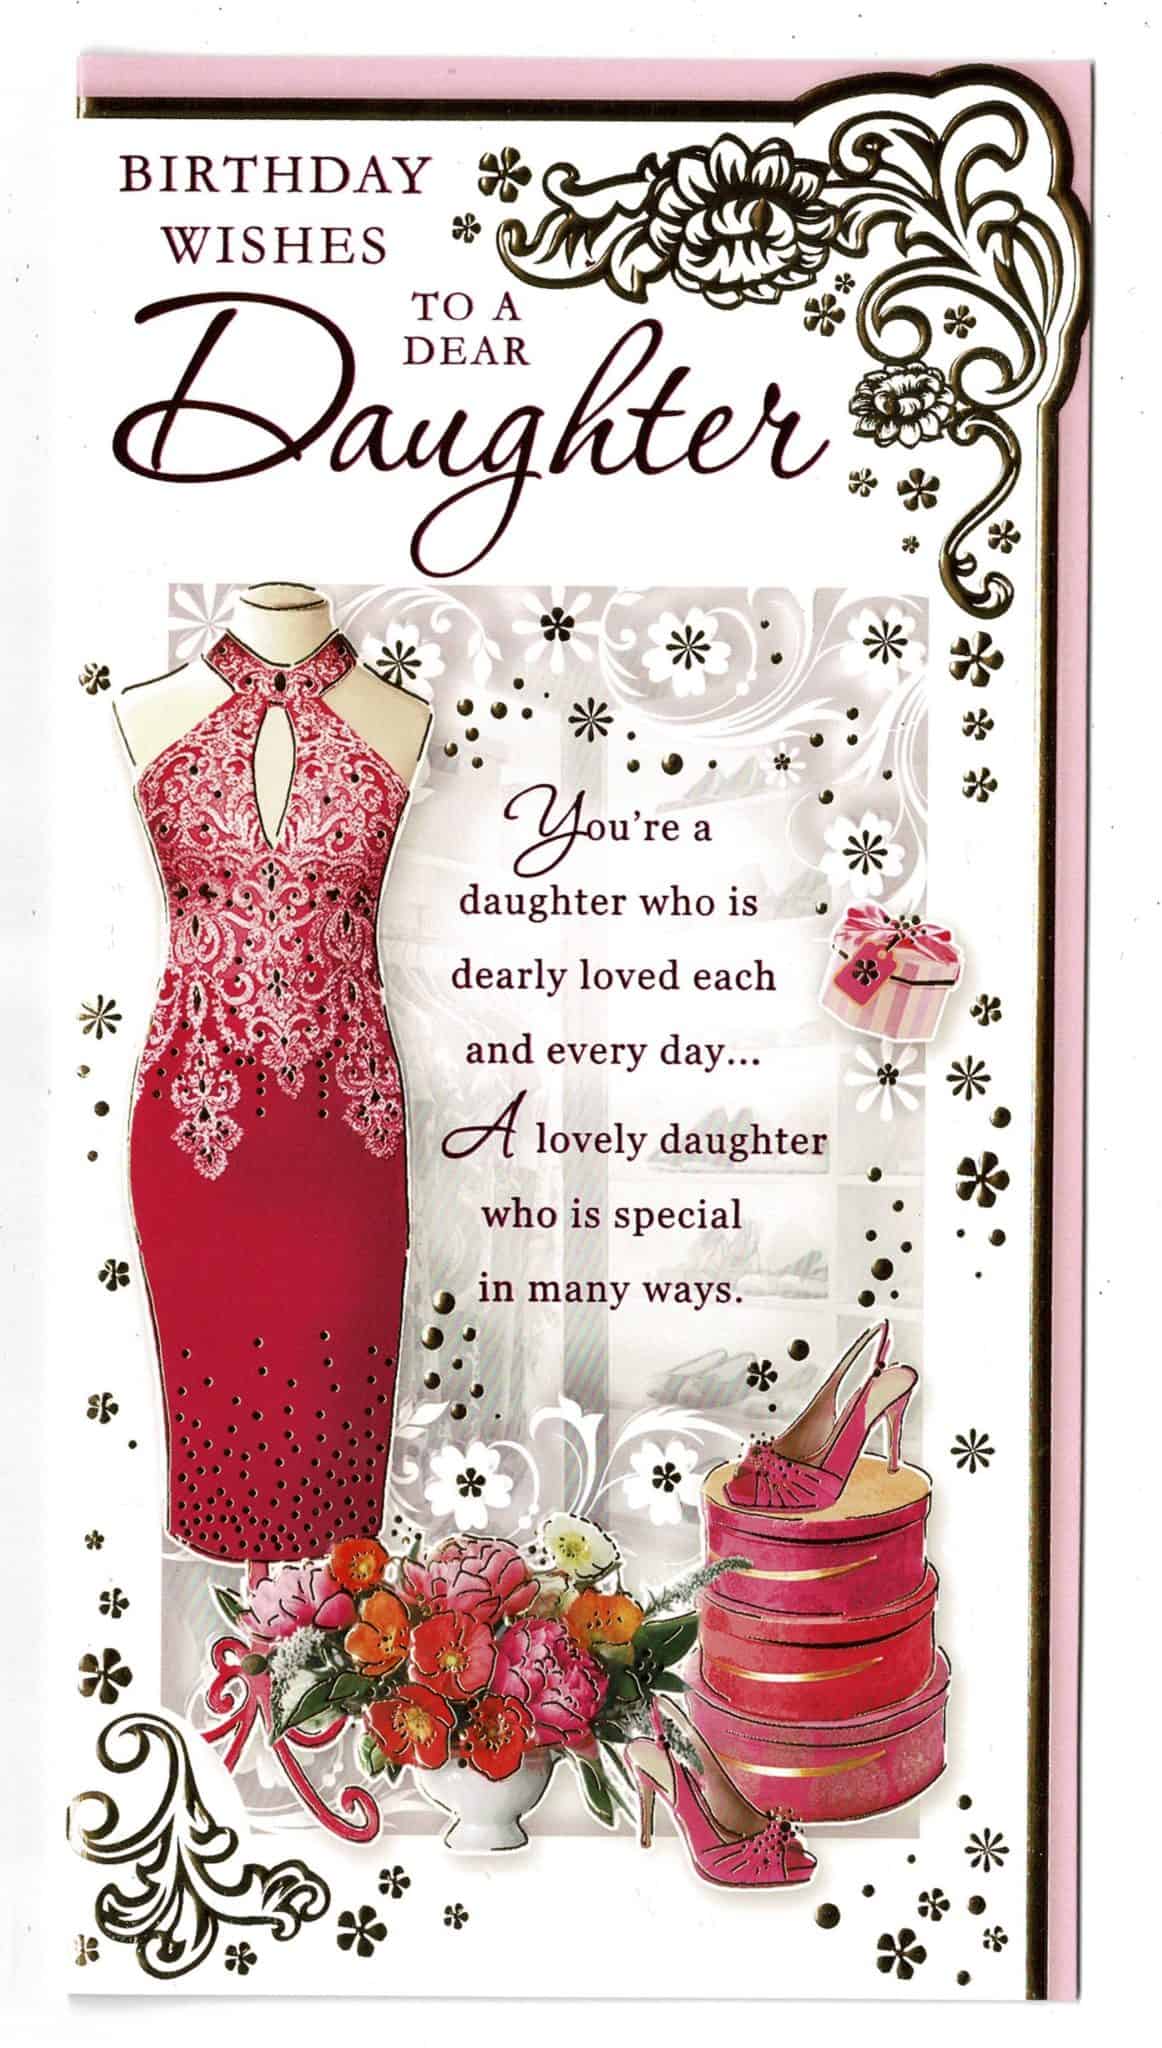 Daughter Birthday Card With Sentiment Verse Birthday Wishes To A Dear Daugh 5035499156971 Ebay